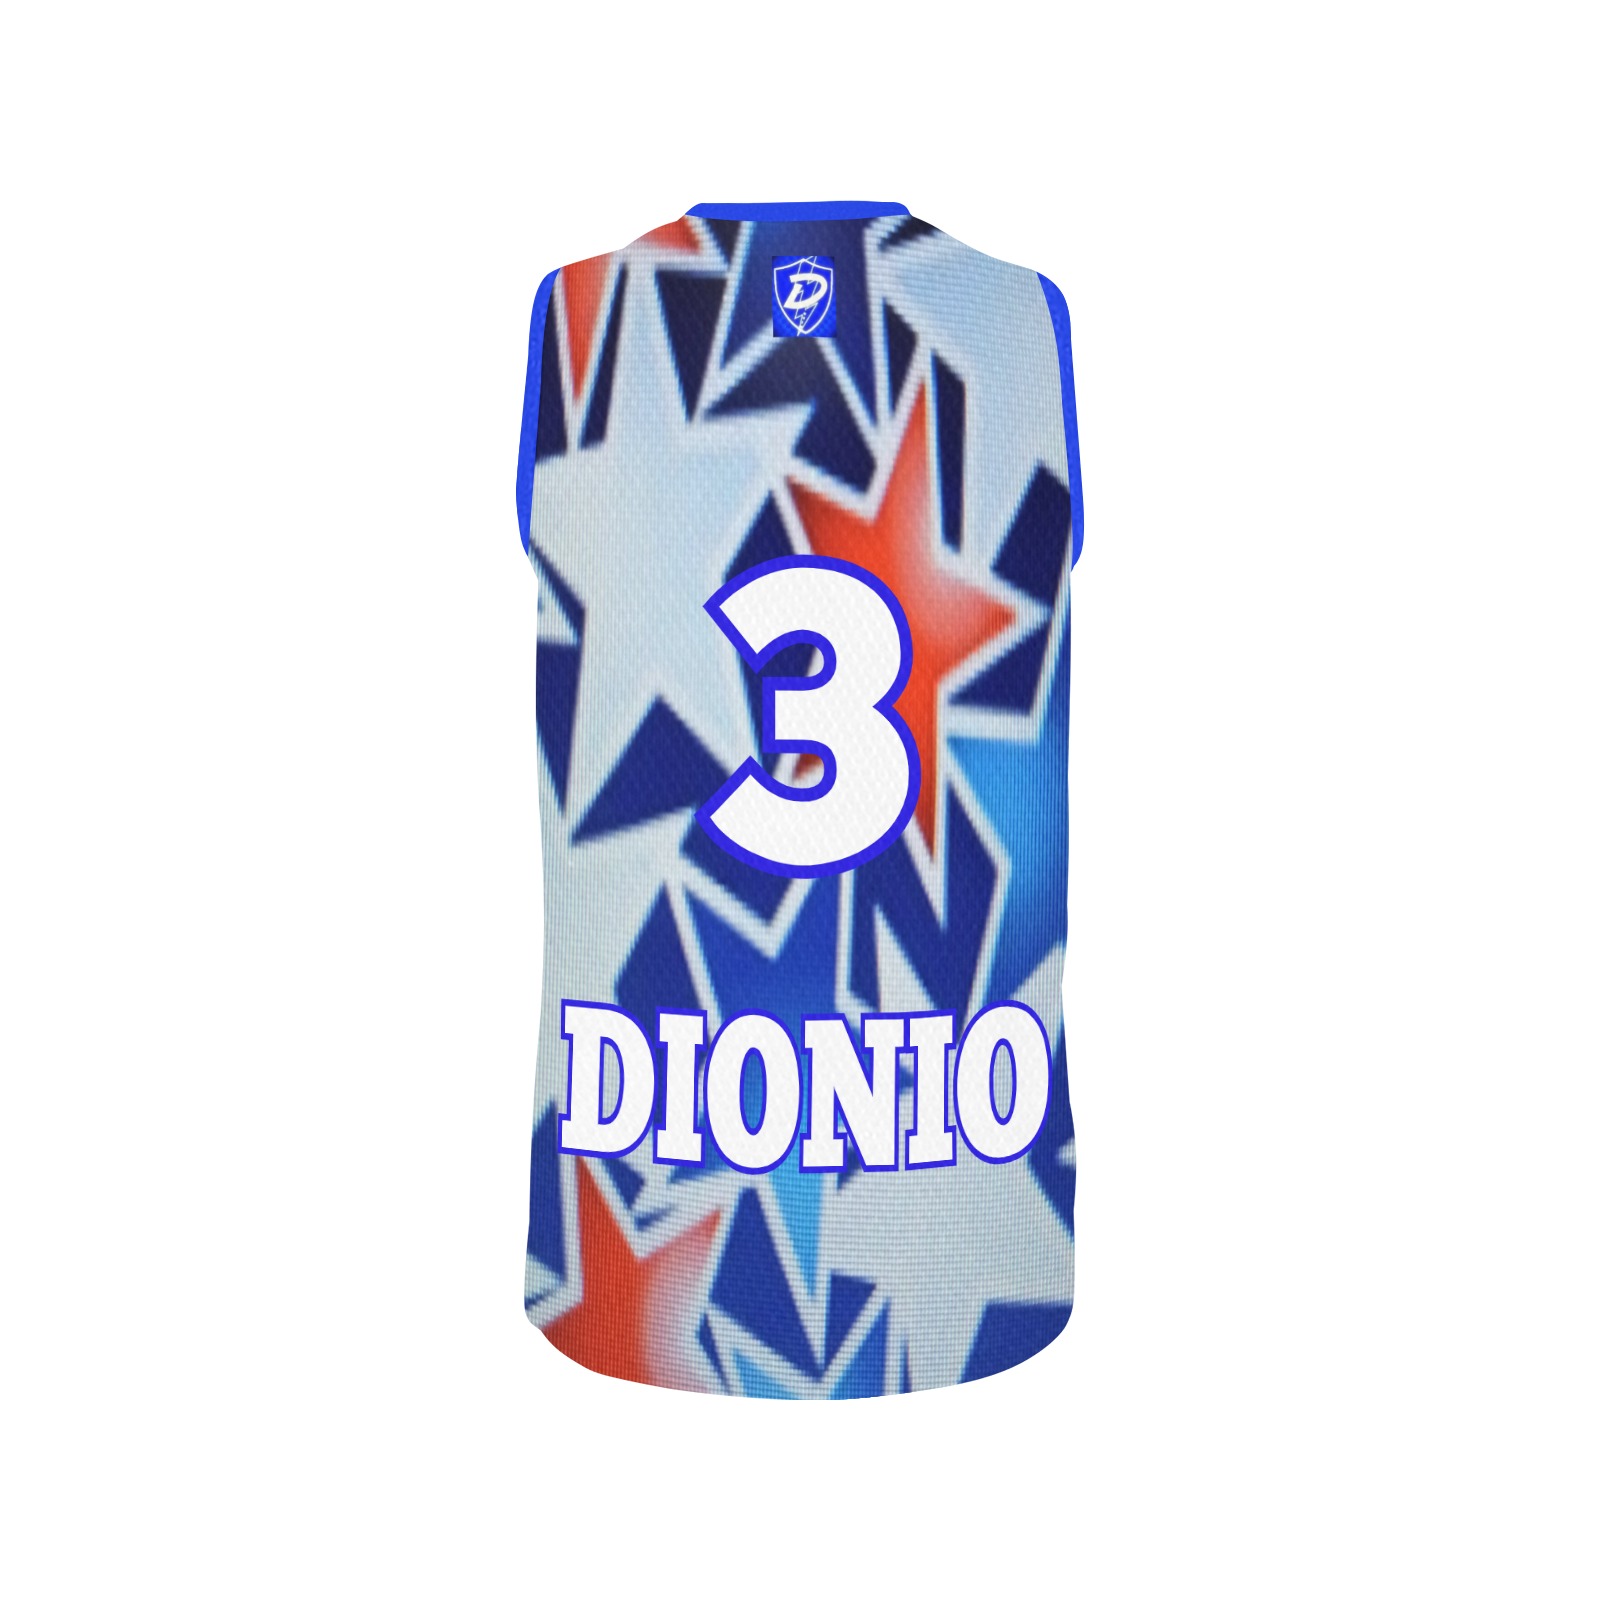 DIONIO - ALL-STAR Basketball Jersey (West #3) All Over Print Basketball Jersey